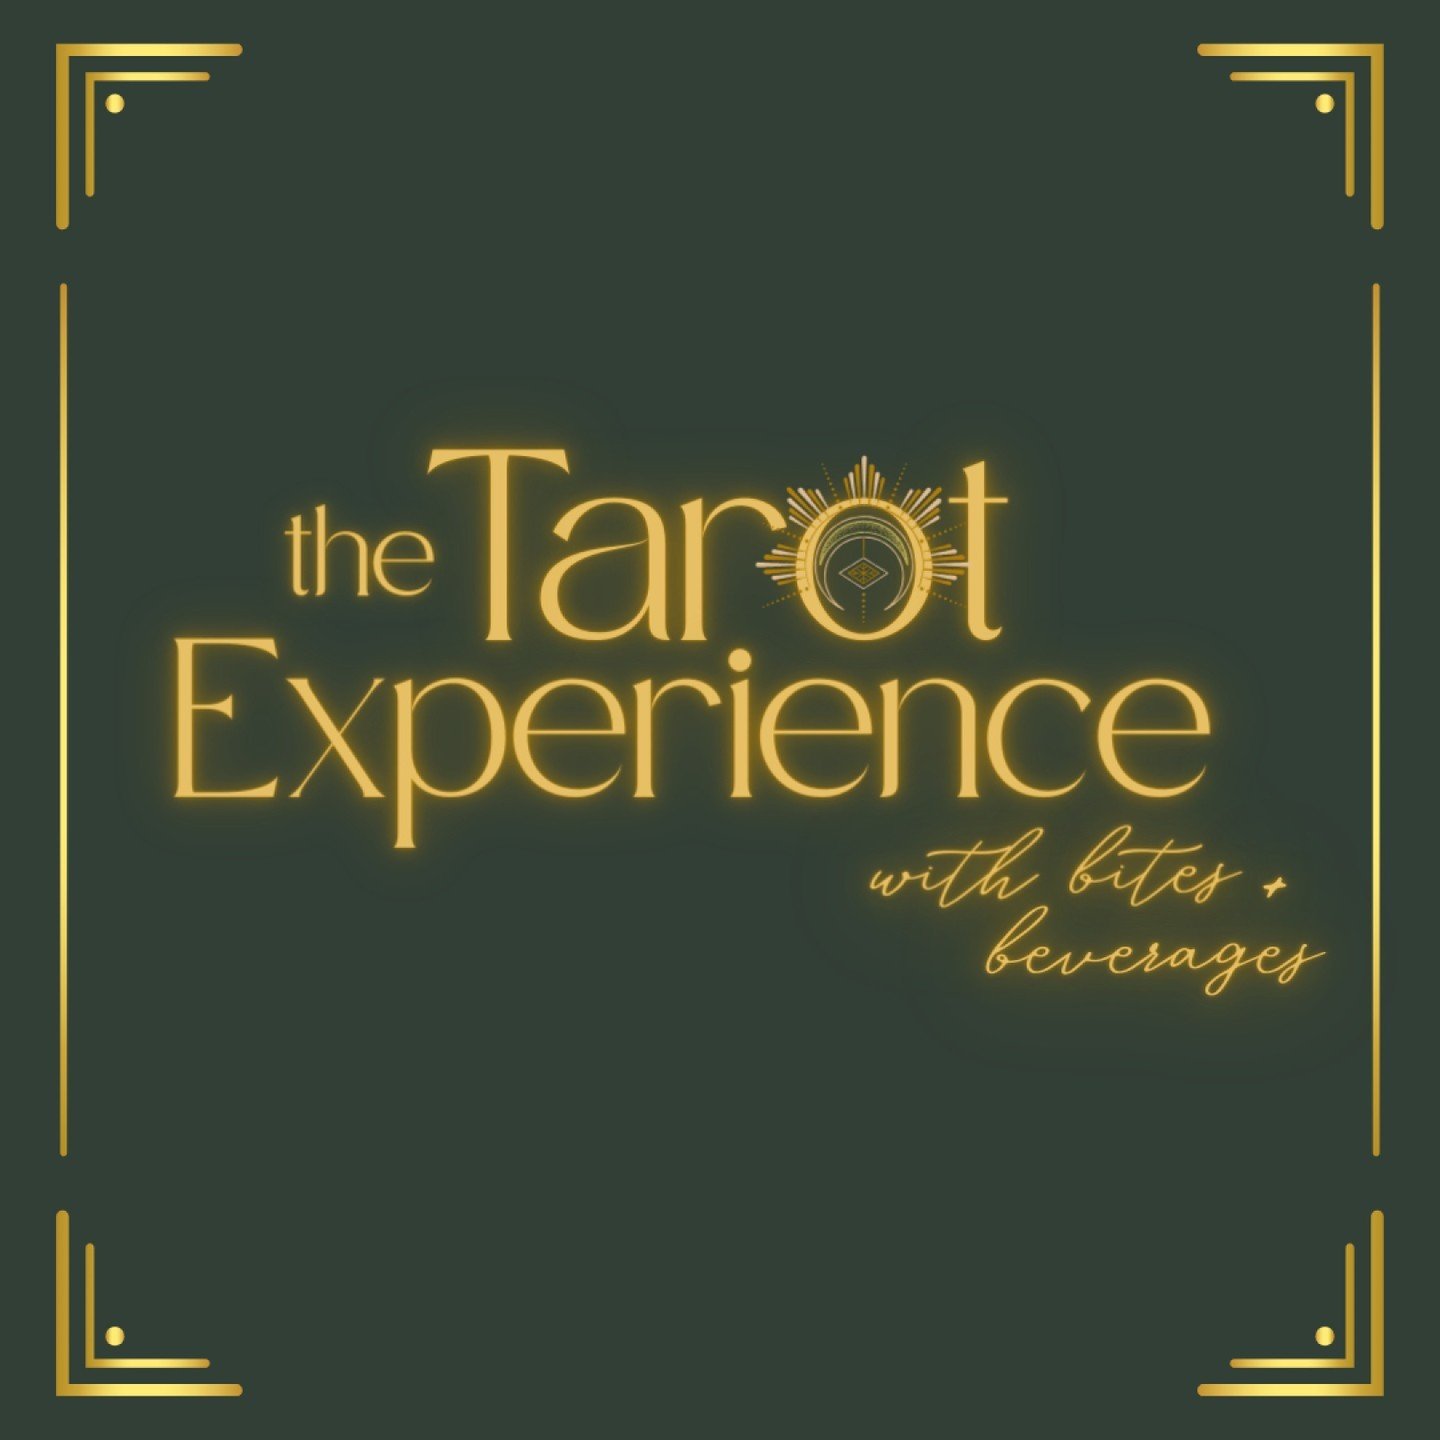 SOLD OUT! - The Tarot Experience - Thank you Cheyenne!

Did you know we offer The Tarot Experience to private groups?  Get your friends together and Rachelle will lead you through the experience.  DM to inquire - details below!

Rachelle will guide y